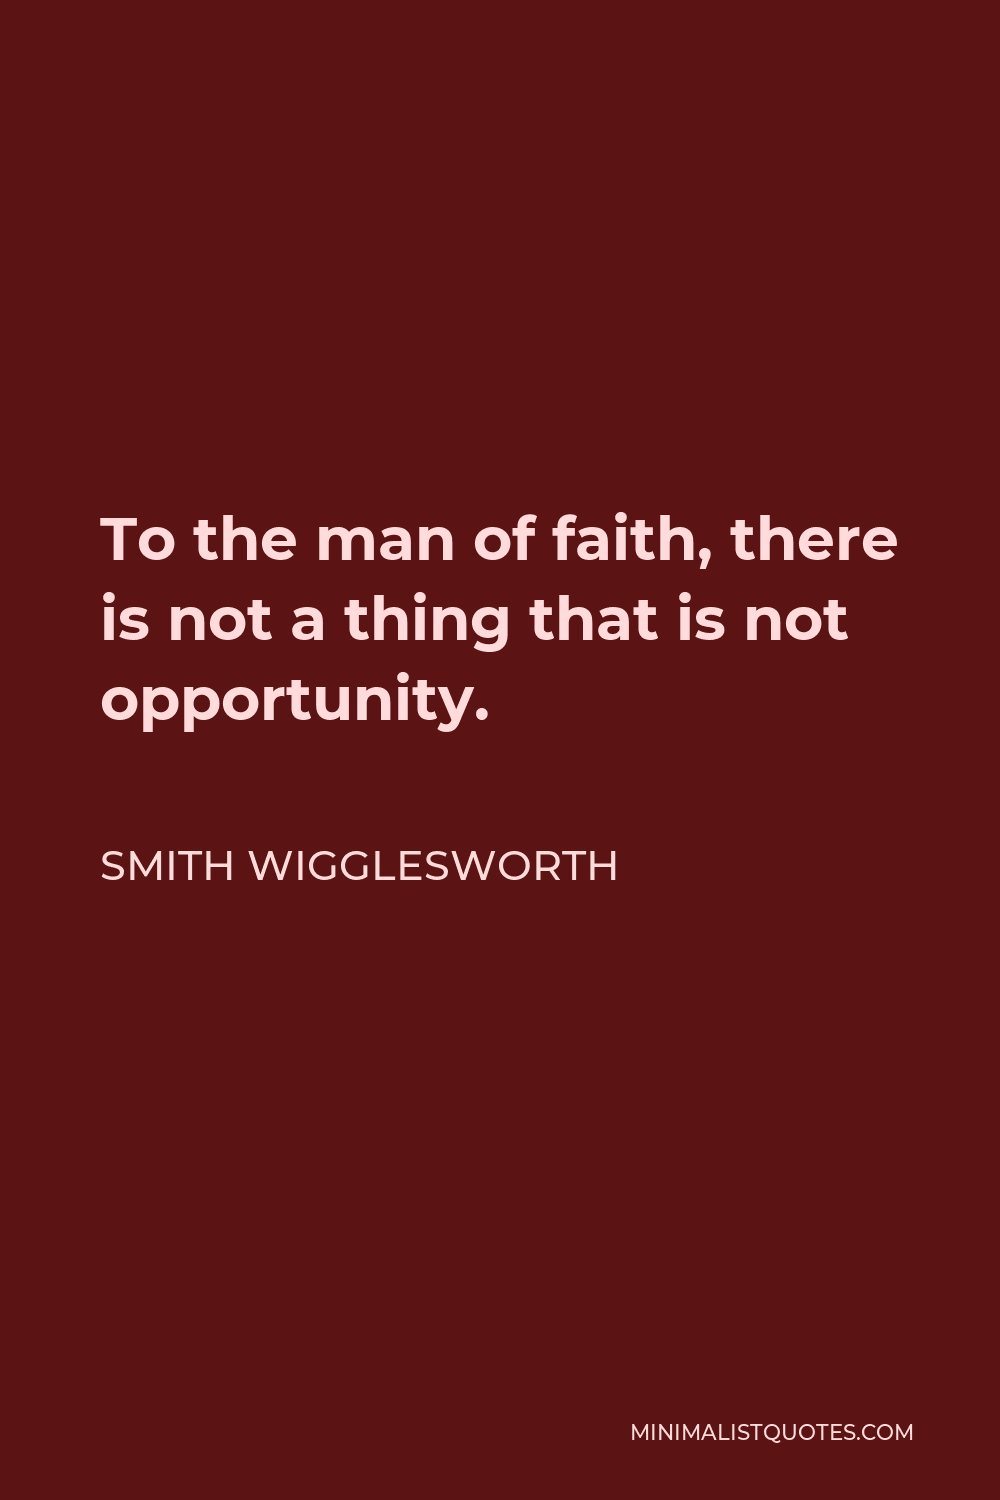 Smith Wigglesworth Quote - To the man of faith, there is not a thing that is not opportunity.